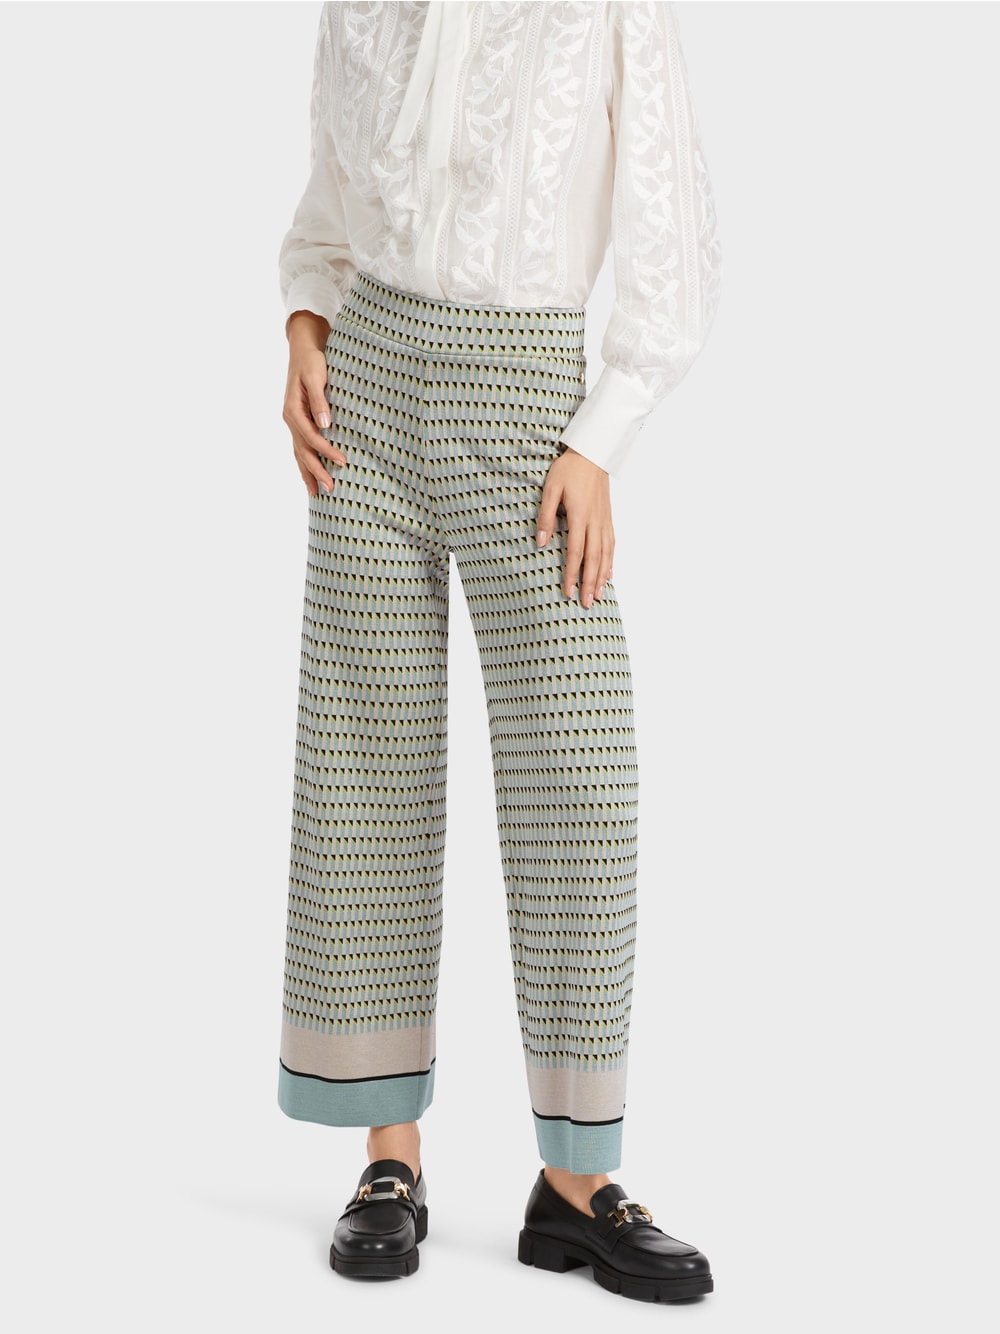 Marc Cain Patterned Pants Knitted in Germany